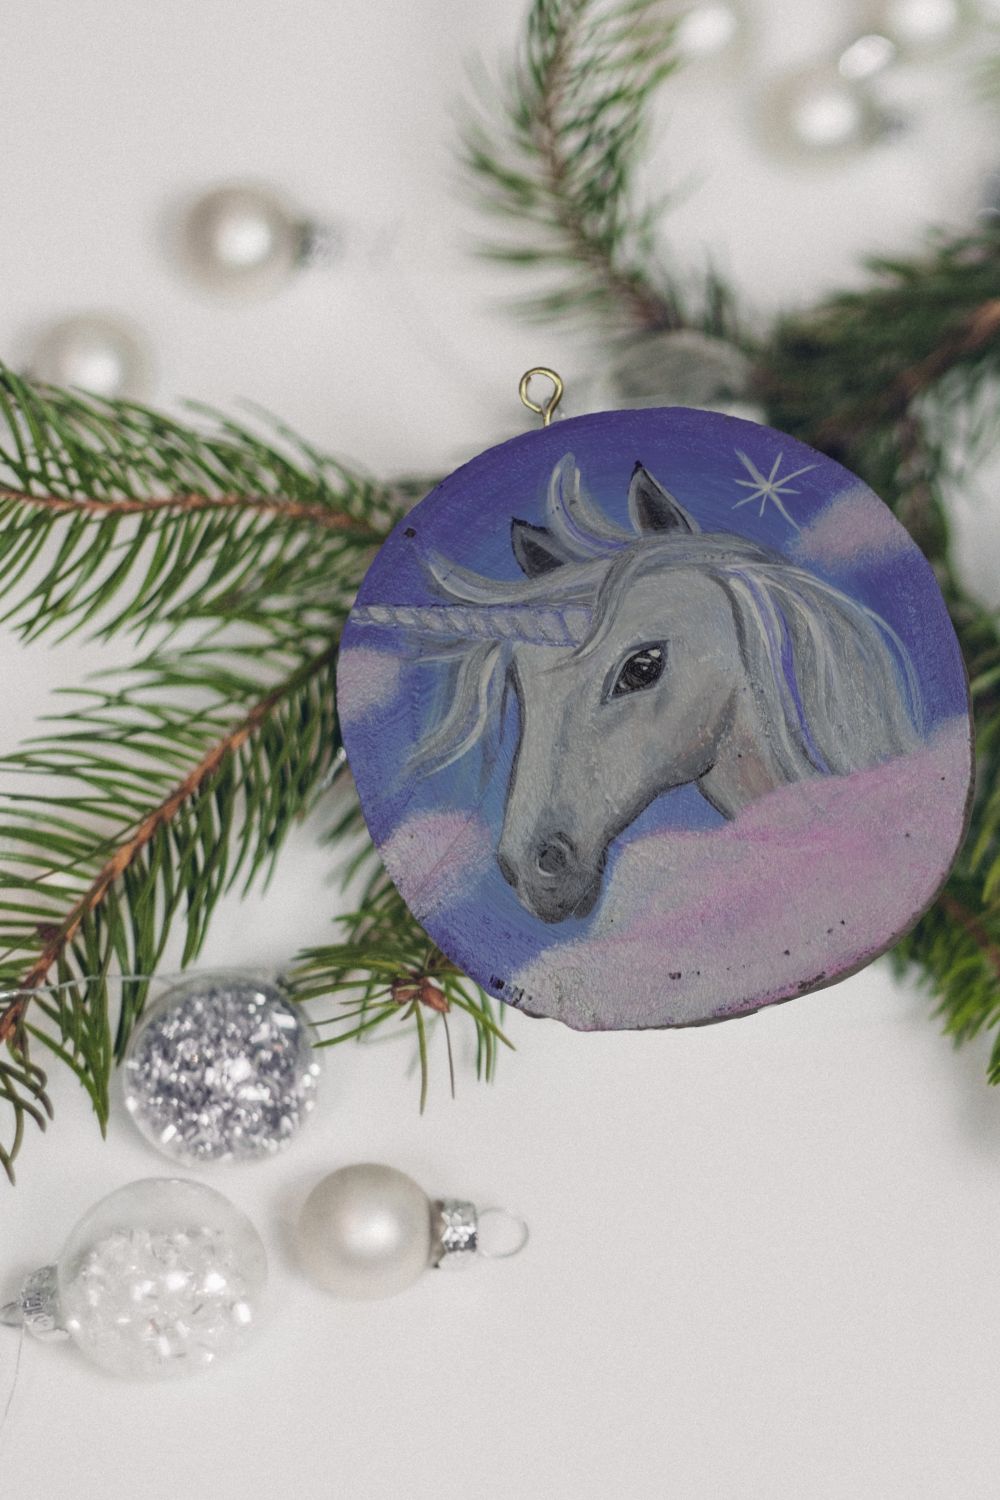 handpainted unicorn wood round ornament with baubles and Christmas tree branch